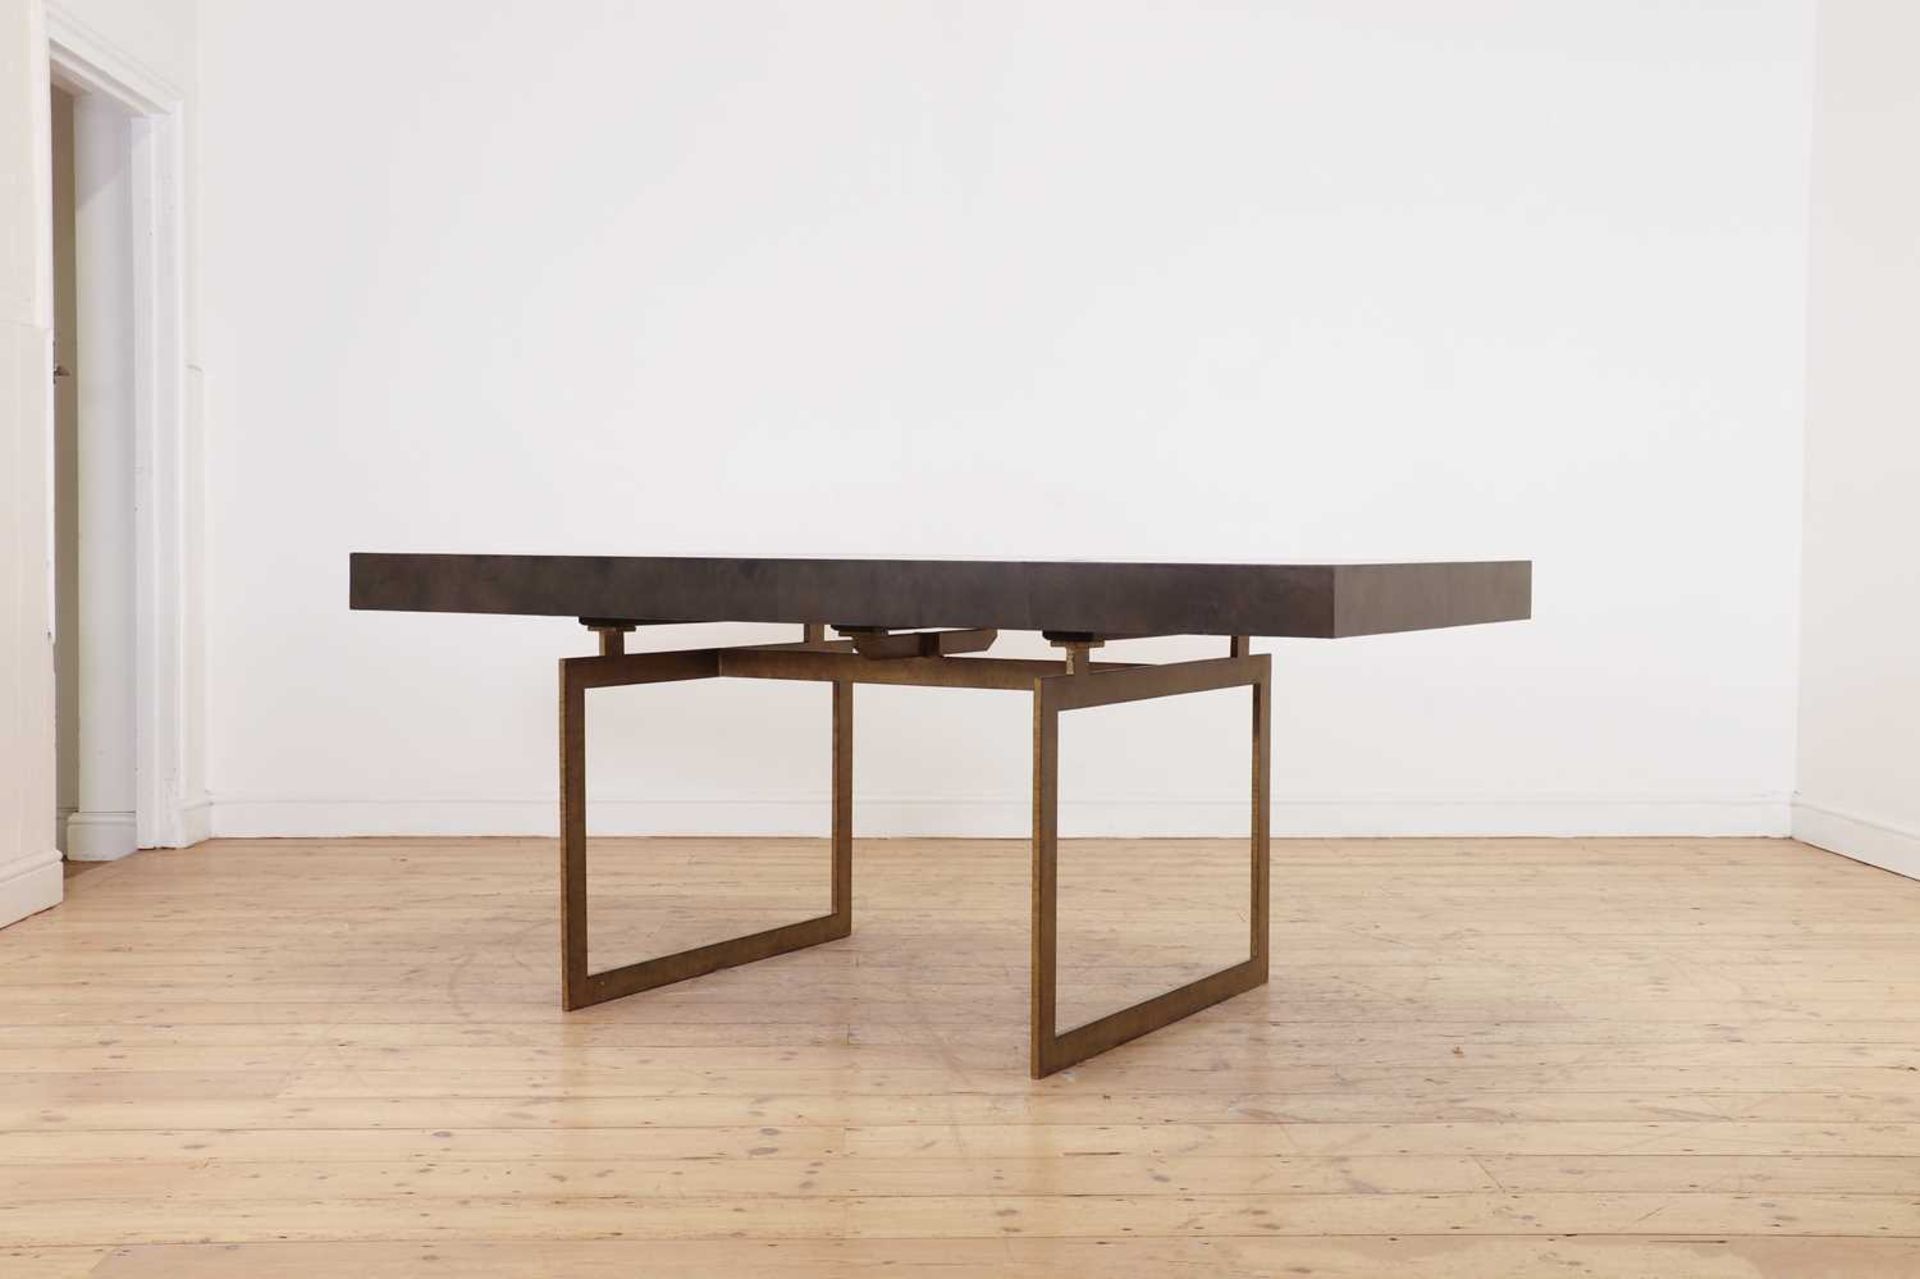 A 'Cortes' desk by Julian Chichester, - Image 3 of 16